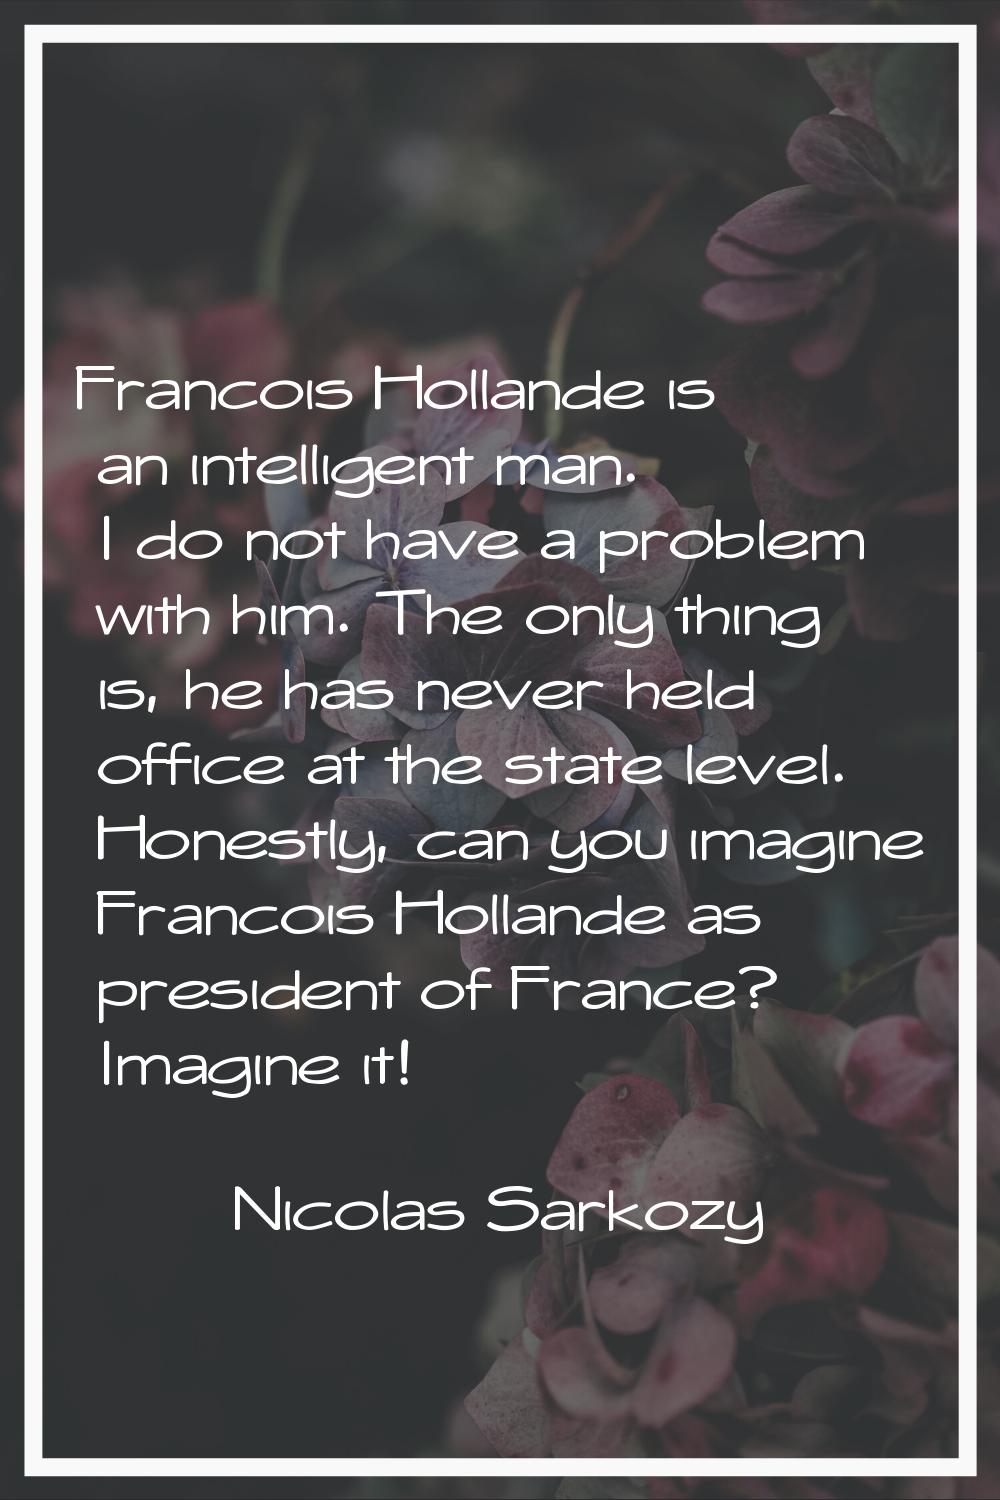 Francois Hollande is an intelligent man. I do not have a problem with him. The only thing is, he ha